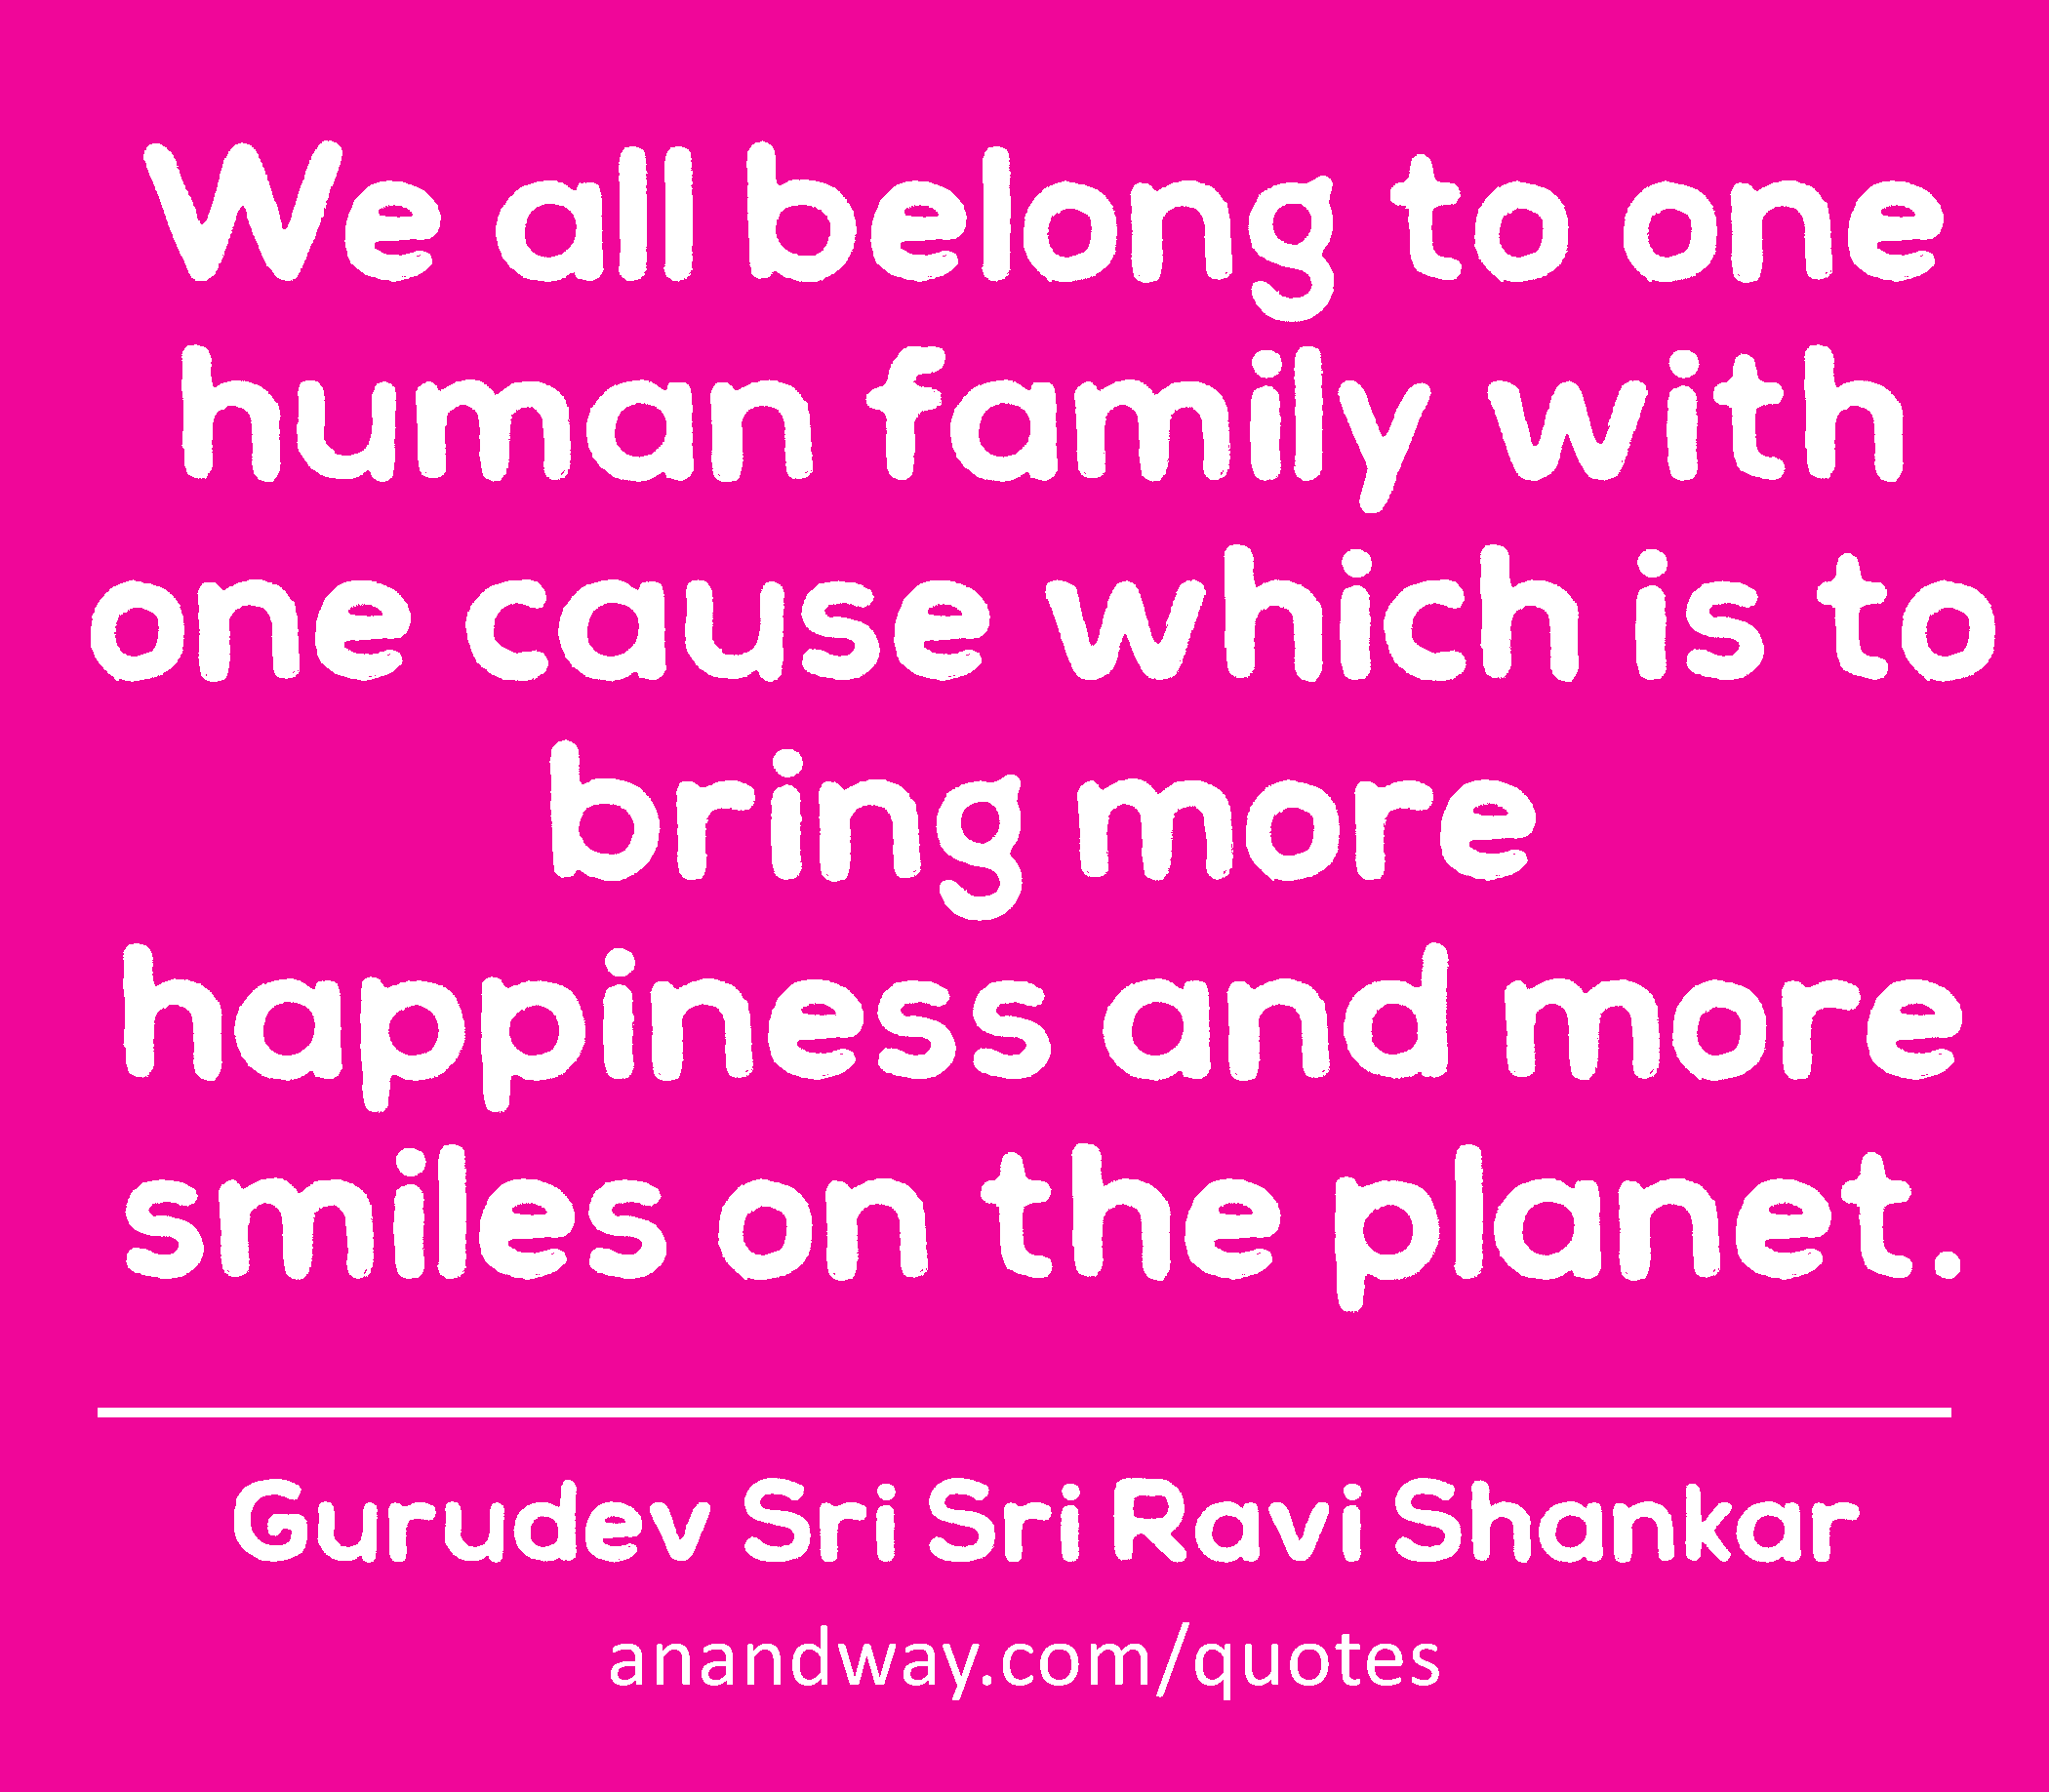 We all belong to one human family with one cause which is to bring more happiness and more smiles
 -Gurudev Sri Sri Ravi Shankar